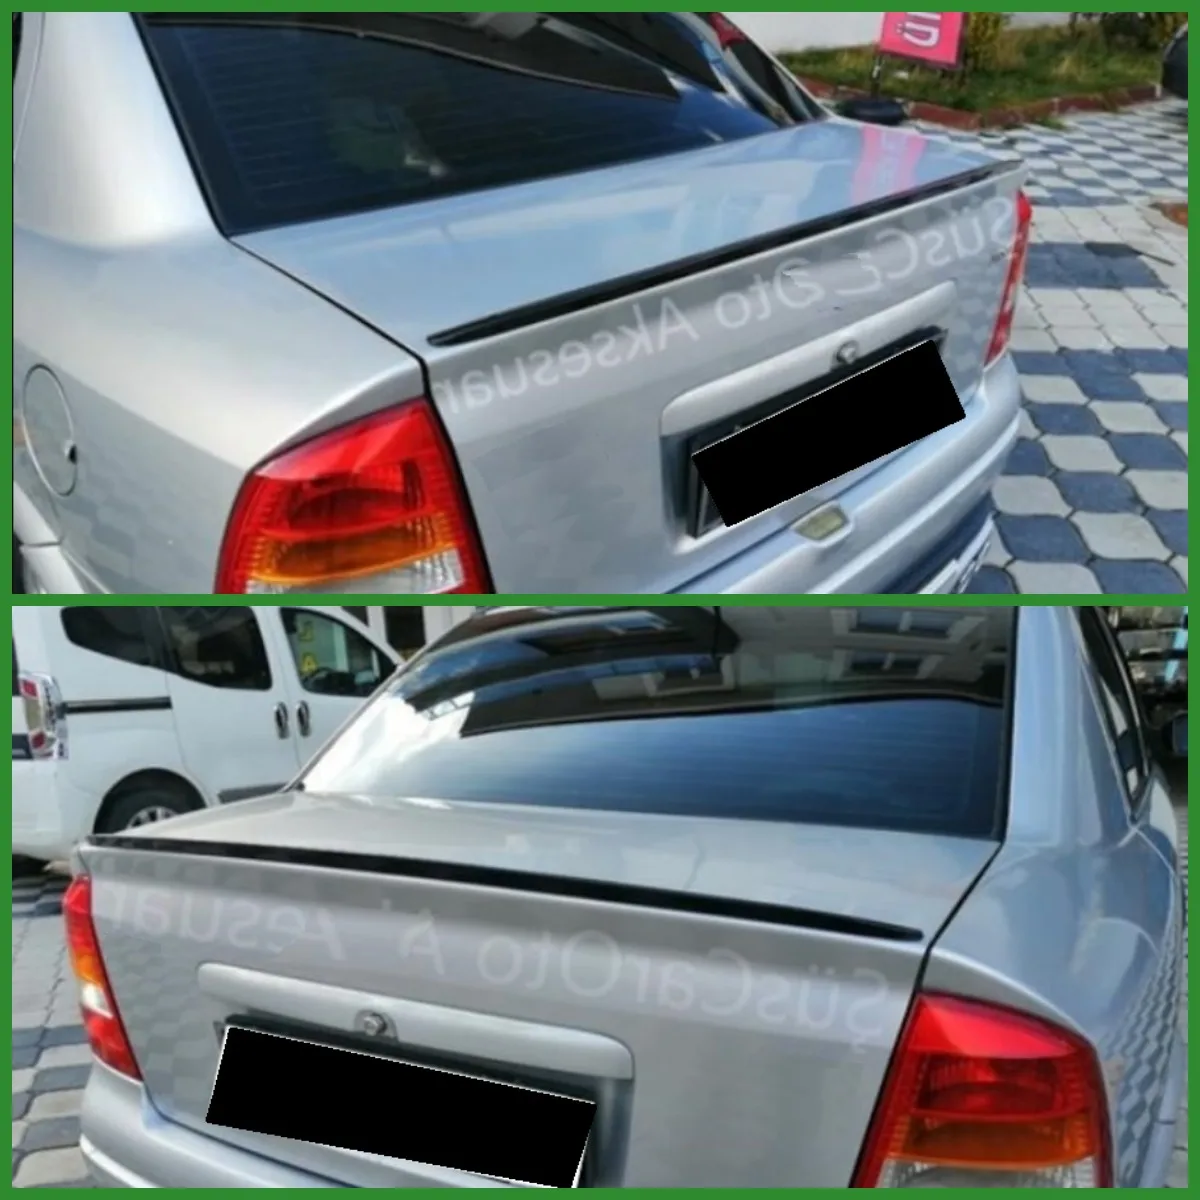 

For Opel Astra G Car Spoiler Perforated Top Center Wing Trunk Spoiler Top Wing Trunk Decoration Fixed Wind Wing Fully suitable